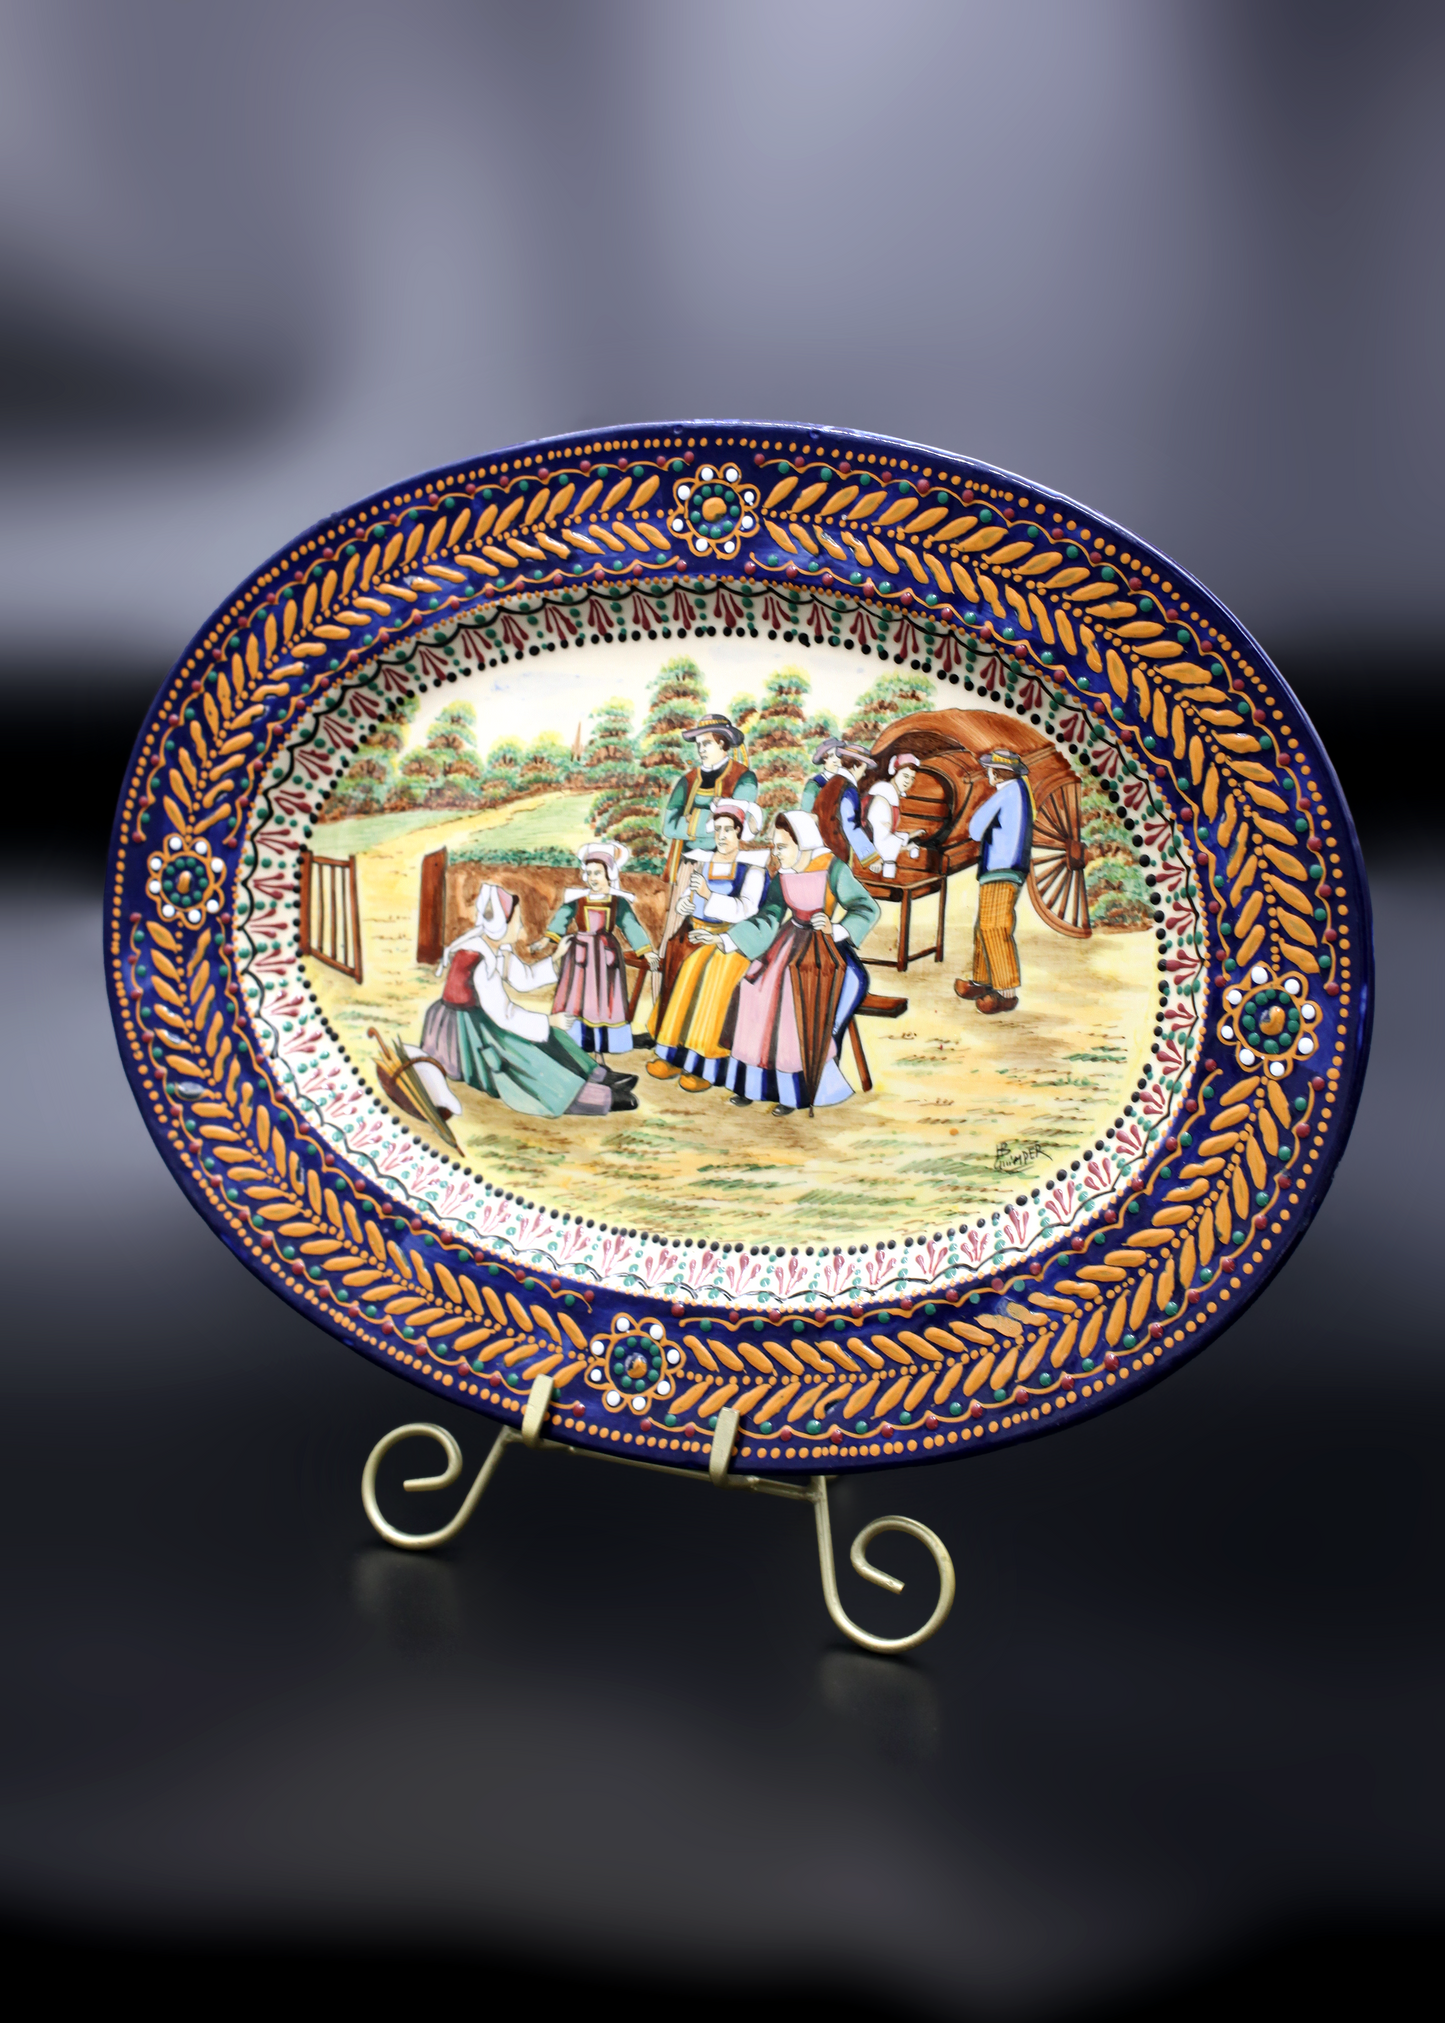 Vintage Signed "HB Quimper" Oval Pottery Platter In The Broderie Pattern